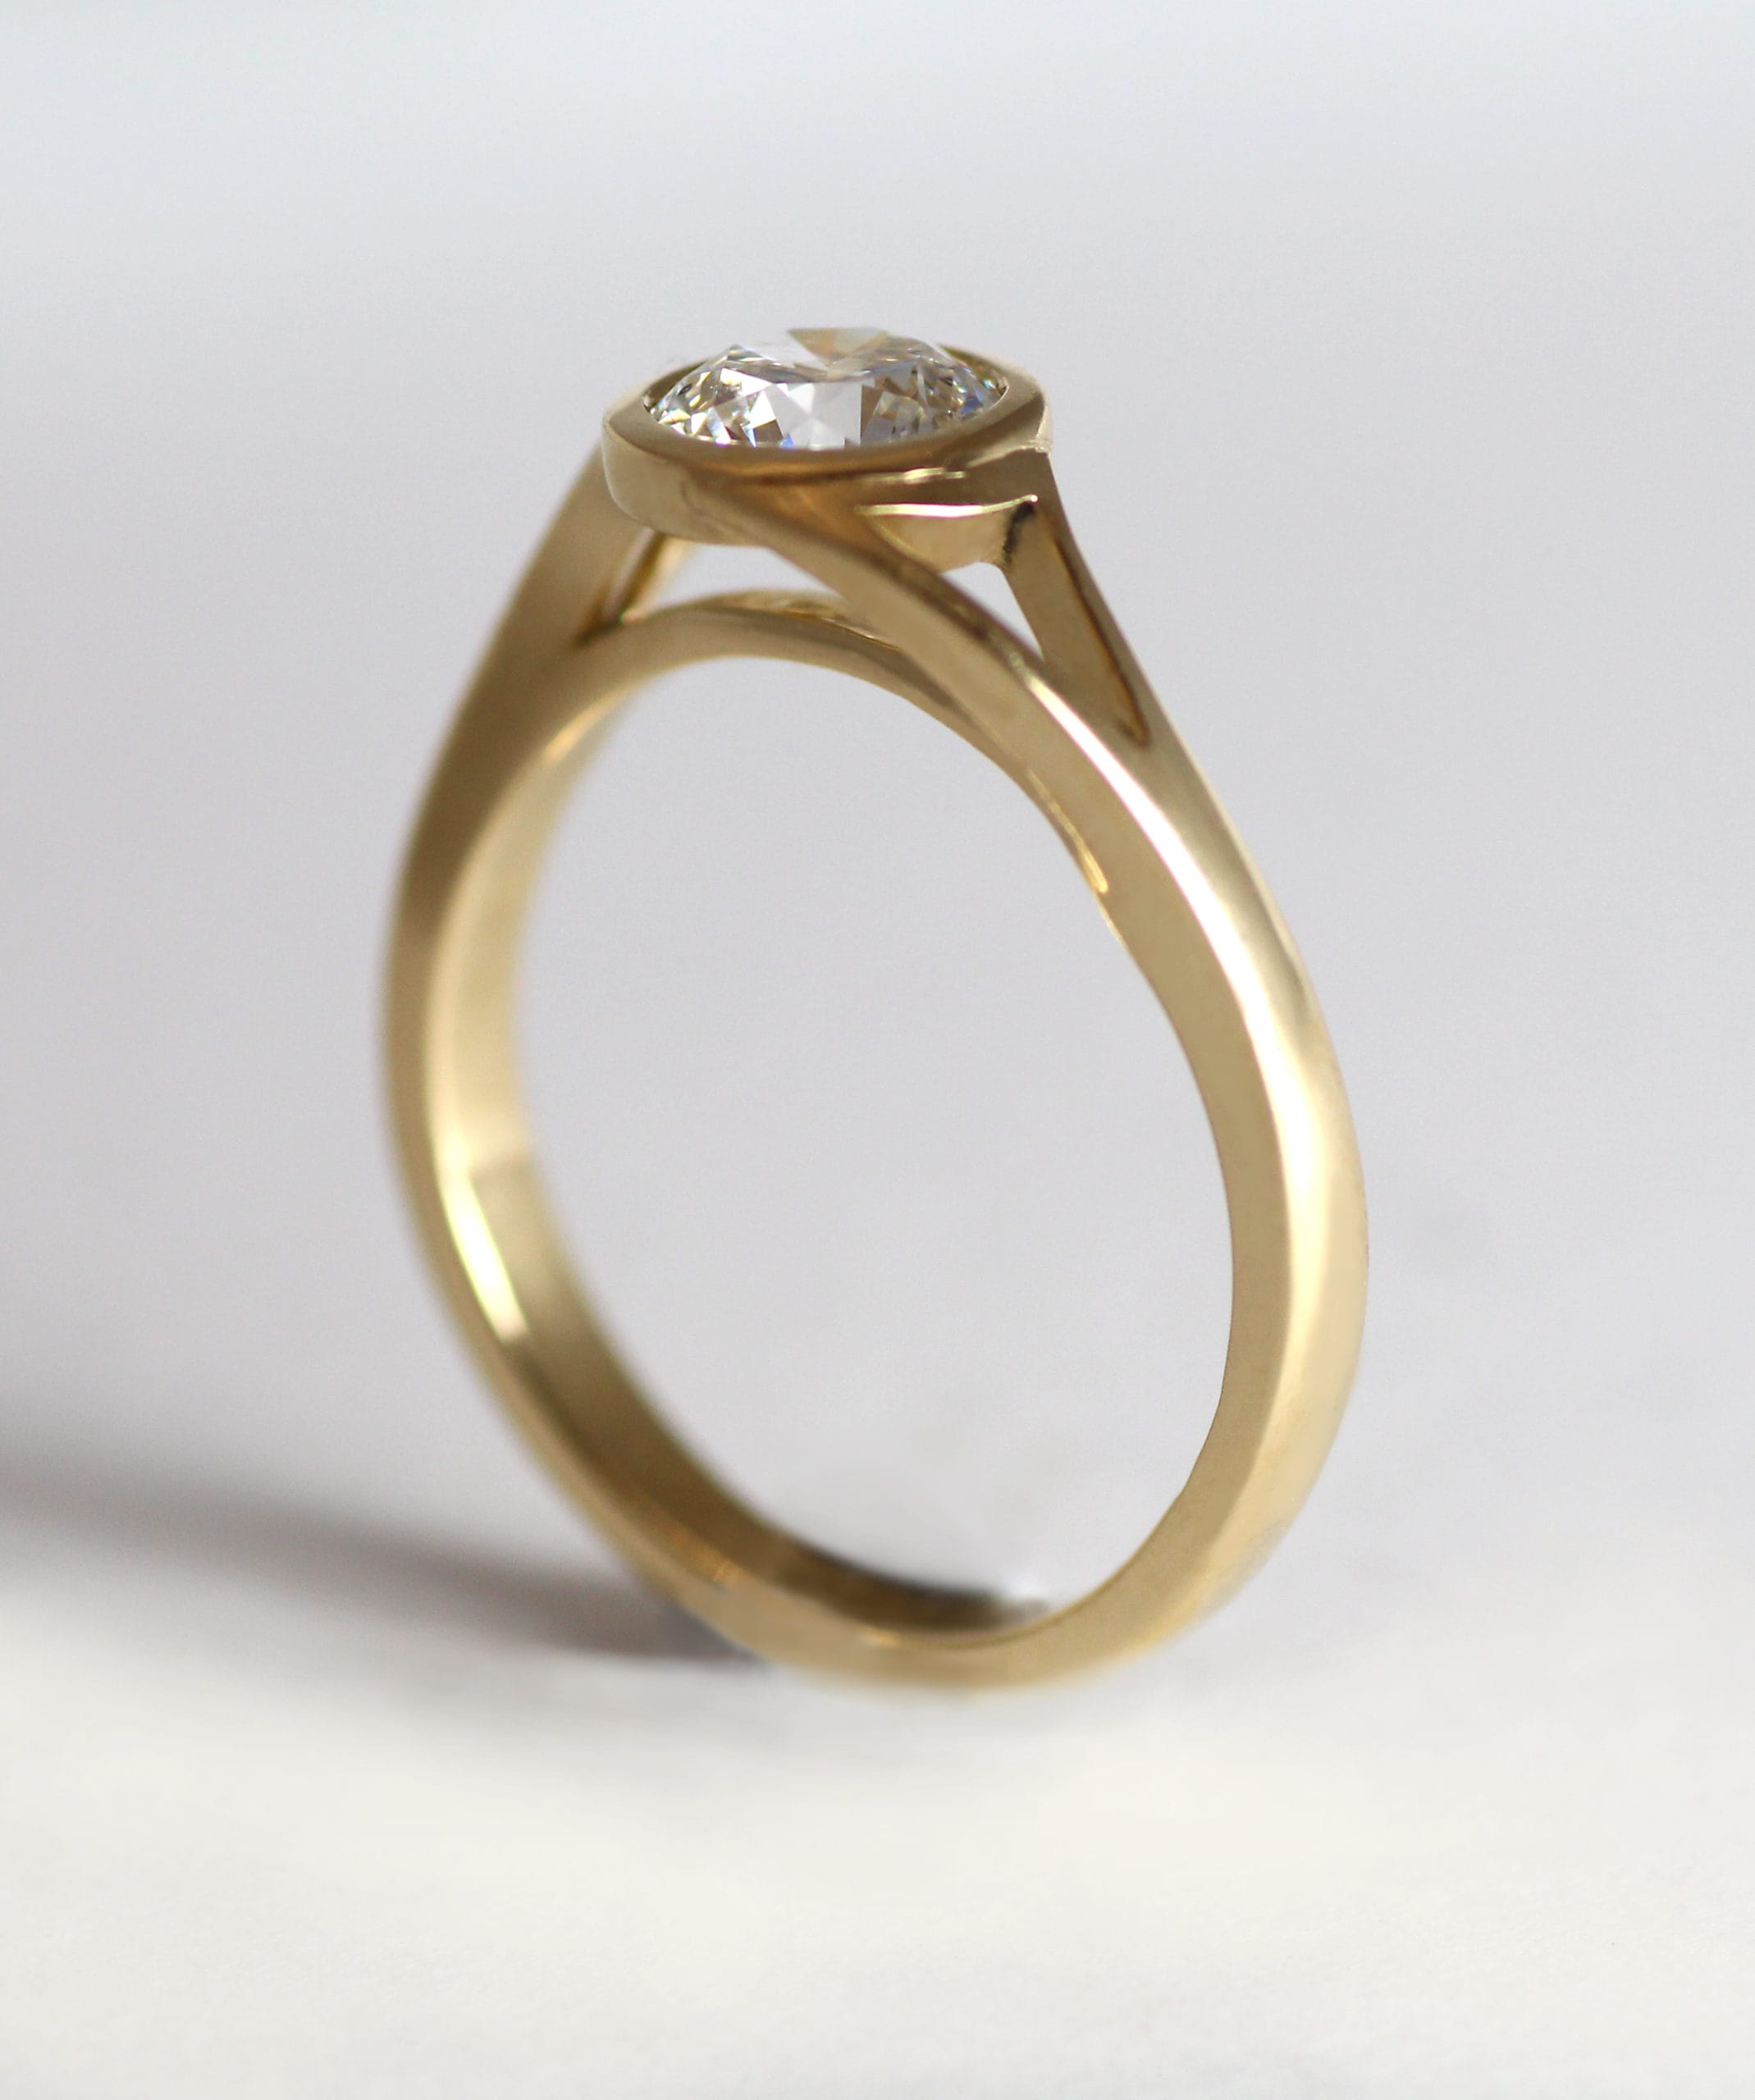 Zoe Pook Jewellery Fairtrade gold ring